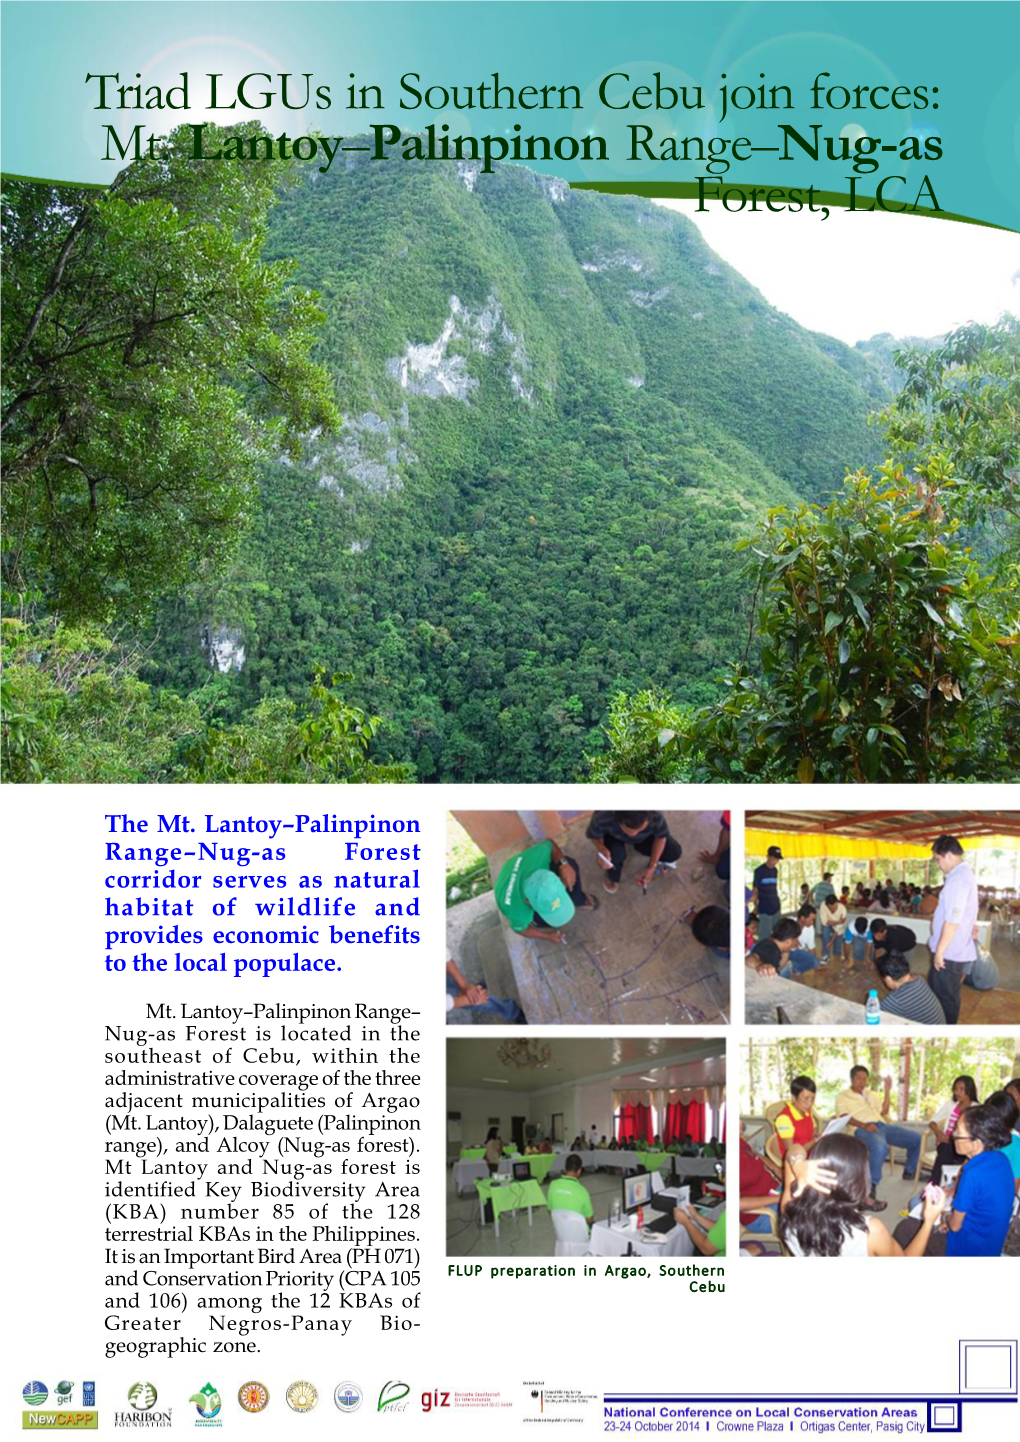 Triad Lgus in Southern Cebu Join Forces: Mt. Lantoy–Palinpinon Range–Nug-As Forest, LCA